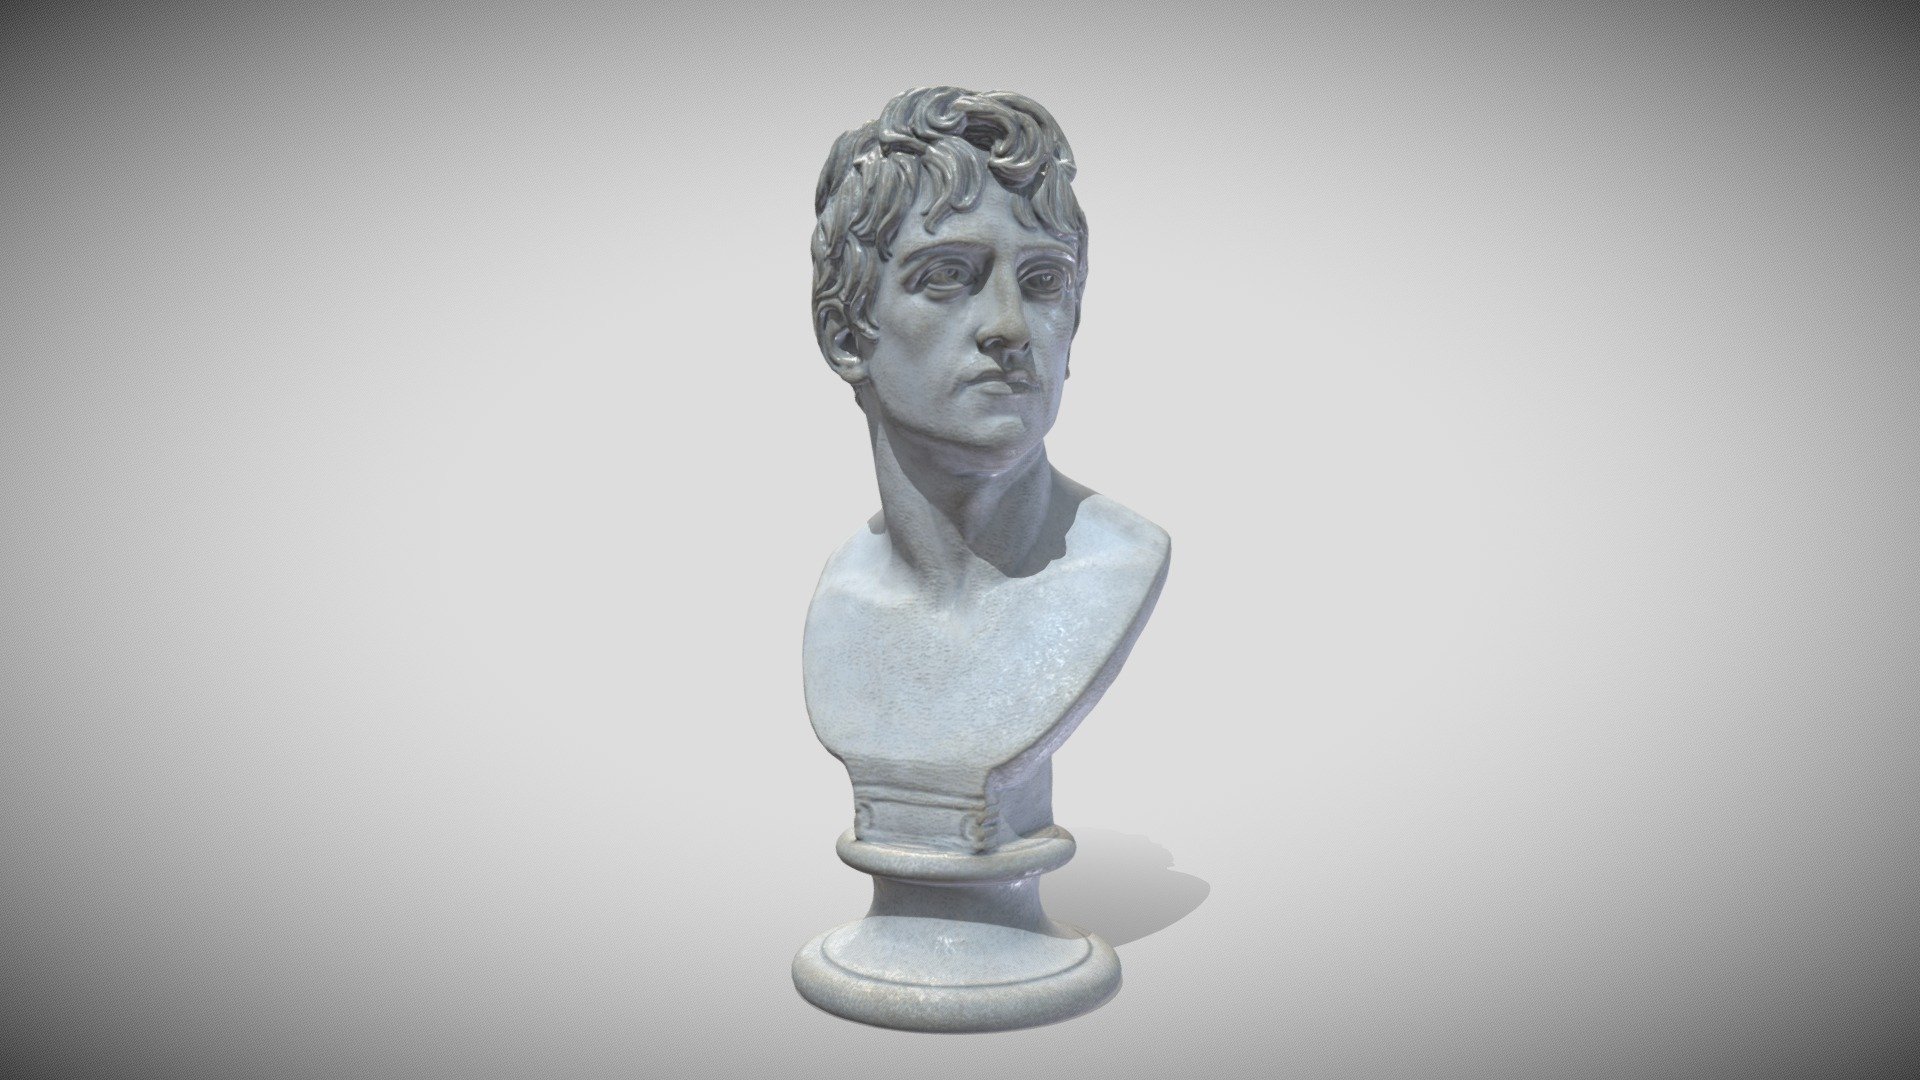 Original very nice 3D Scan from the Thorvaldsens Museum

https://thorvaldsensmuseum.dk/en/collections/work/A211

here the Painted Gaming Version LR... 3d model